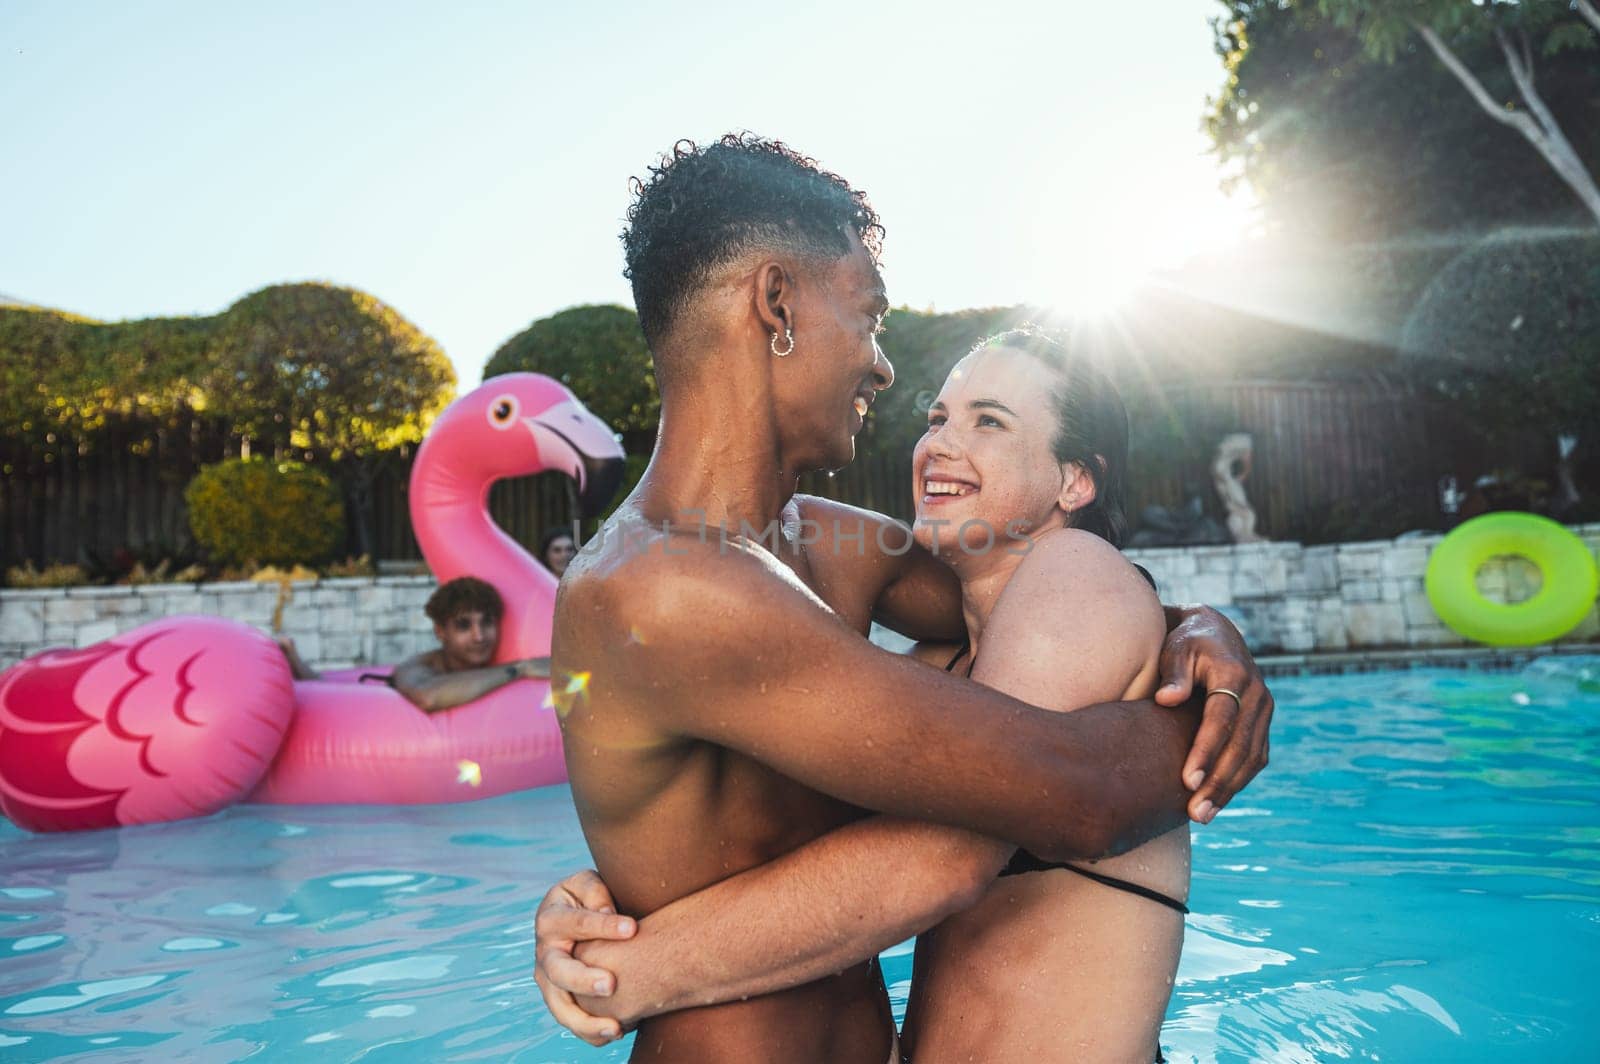 Pool party, love and couple hug, having fun and bonding together. Swimming, romance diversity and man and woman hugging, cuddle or laugh at funny joke in water at summer event or new year celebration by YuriArcurs